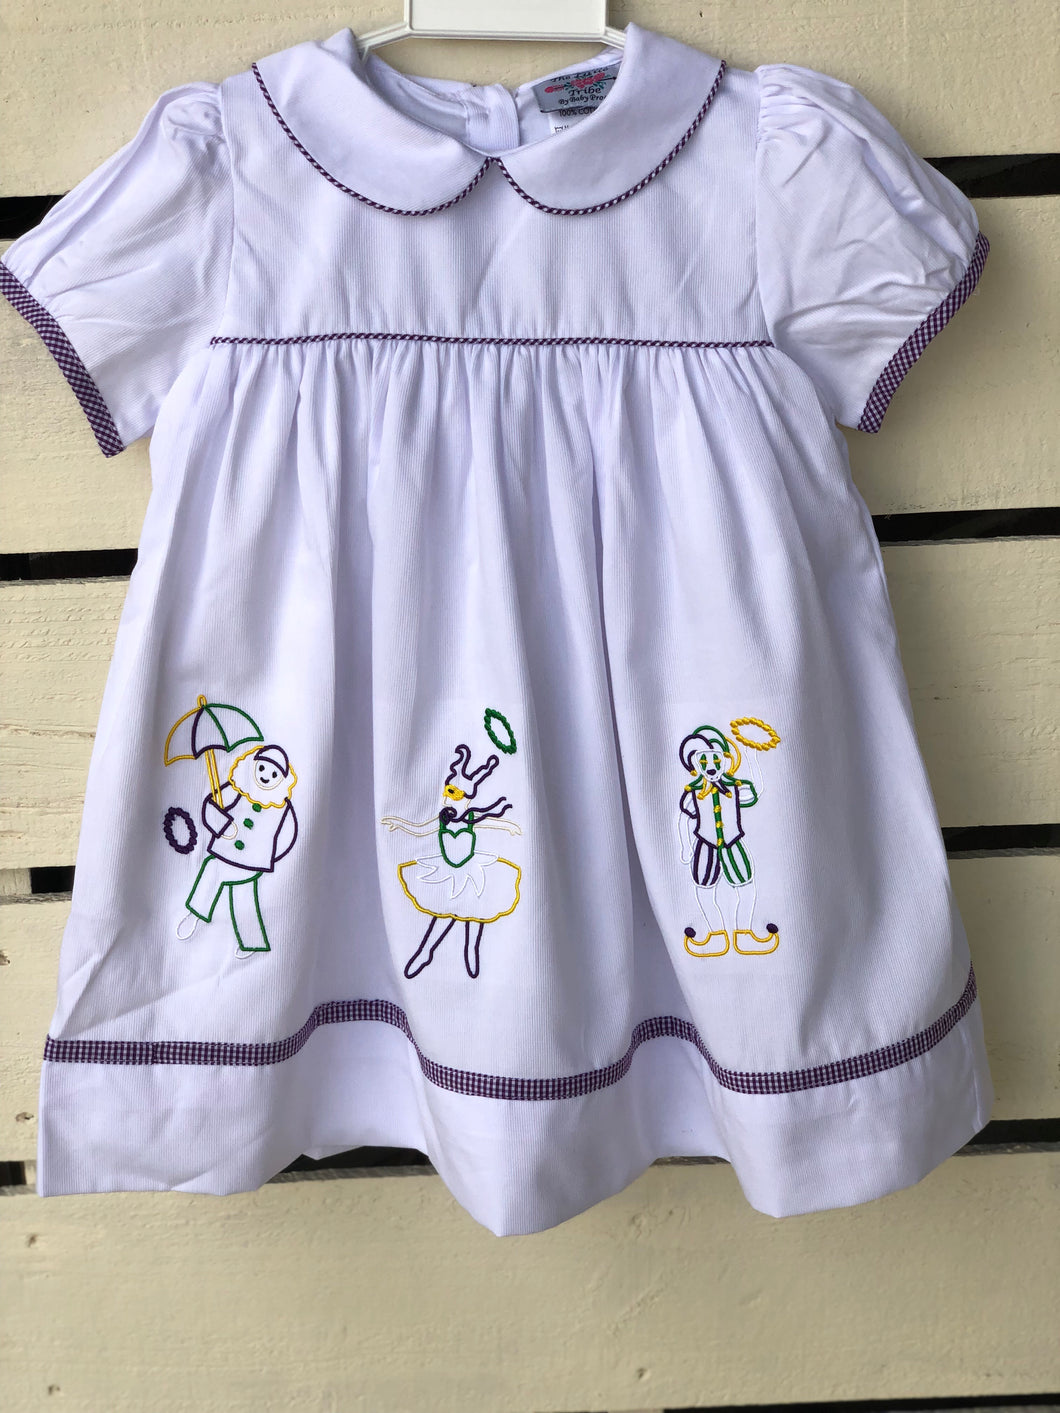 Mardi Gras cotton dress with embroidery